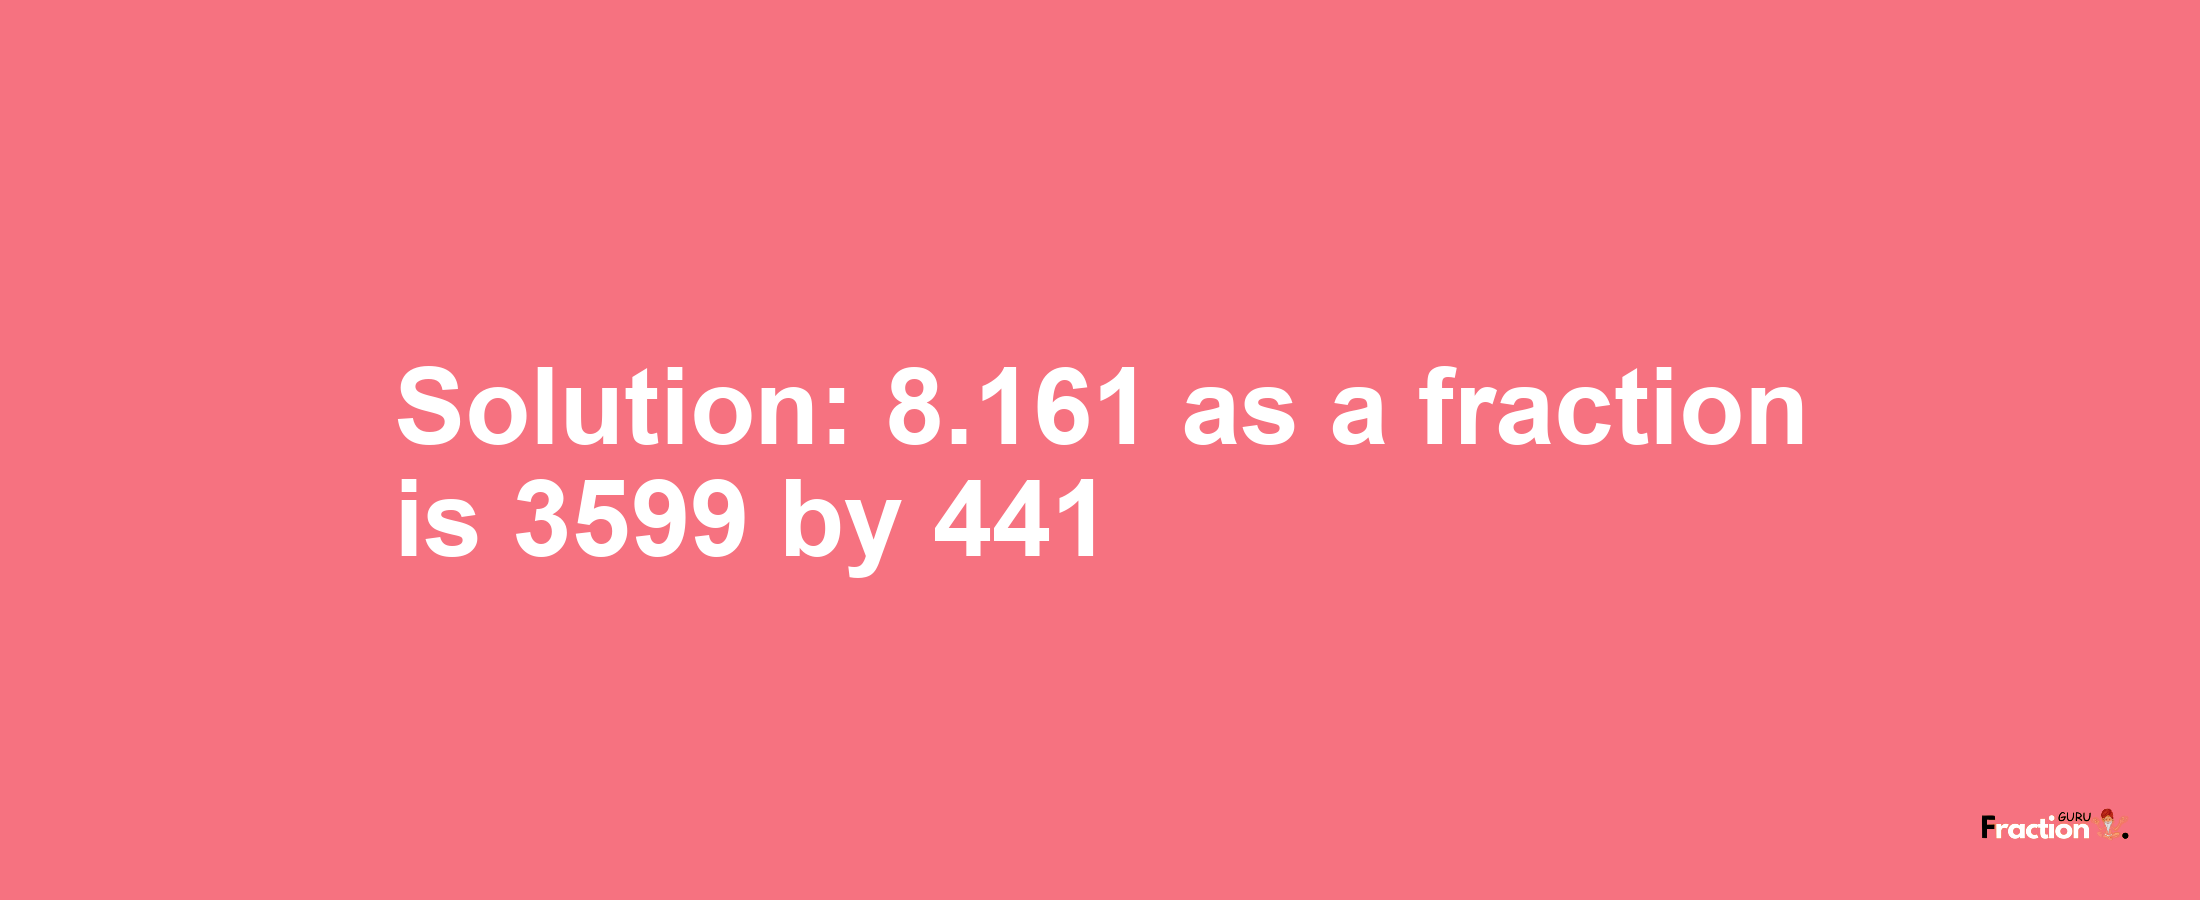 Solution:8.161 as a fraction is 3599/441